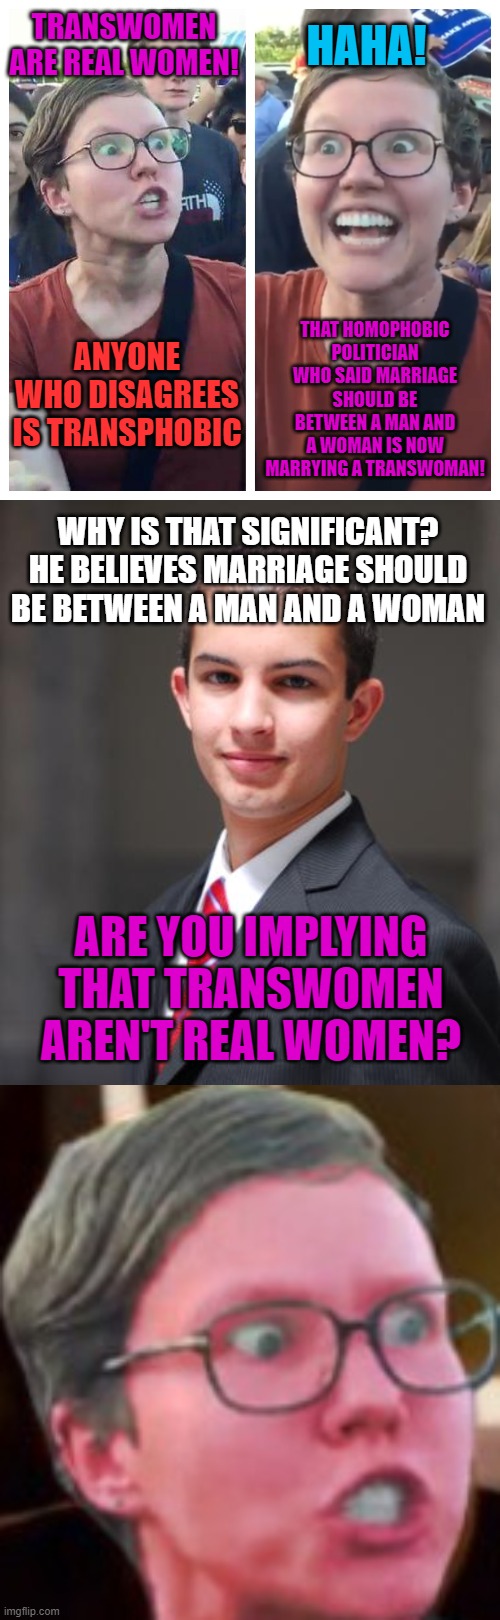 HAHA! TRANSWOMEN ARE REAL WOMEN! THAT HOMOPHOBIC POLITICIAN WHO SAID MARRIAGE SHOULD BE BETWEEN A MAN AND A WOMAN IS NOW MARRYING A TRANSWOMAN! ANYONE WHO DISAGREES IS TRANSPHOBIC; WHY IS THAT SIGNIFICANT? HE BELIEVES MARRIAGE SHOULD BE BETWEEN A MAN AND A WOMAN; ARE YOU IMPLYING THAT TRANSWOMEN AREN'T REAL WOMEN? | image tagged in college conservative,feminist,transgender,marriage,memes,hypocrisy | made w/ Imgflip meme maker